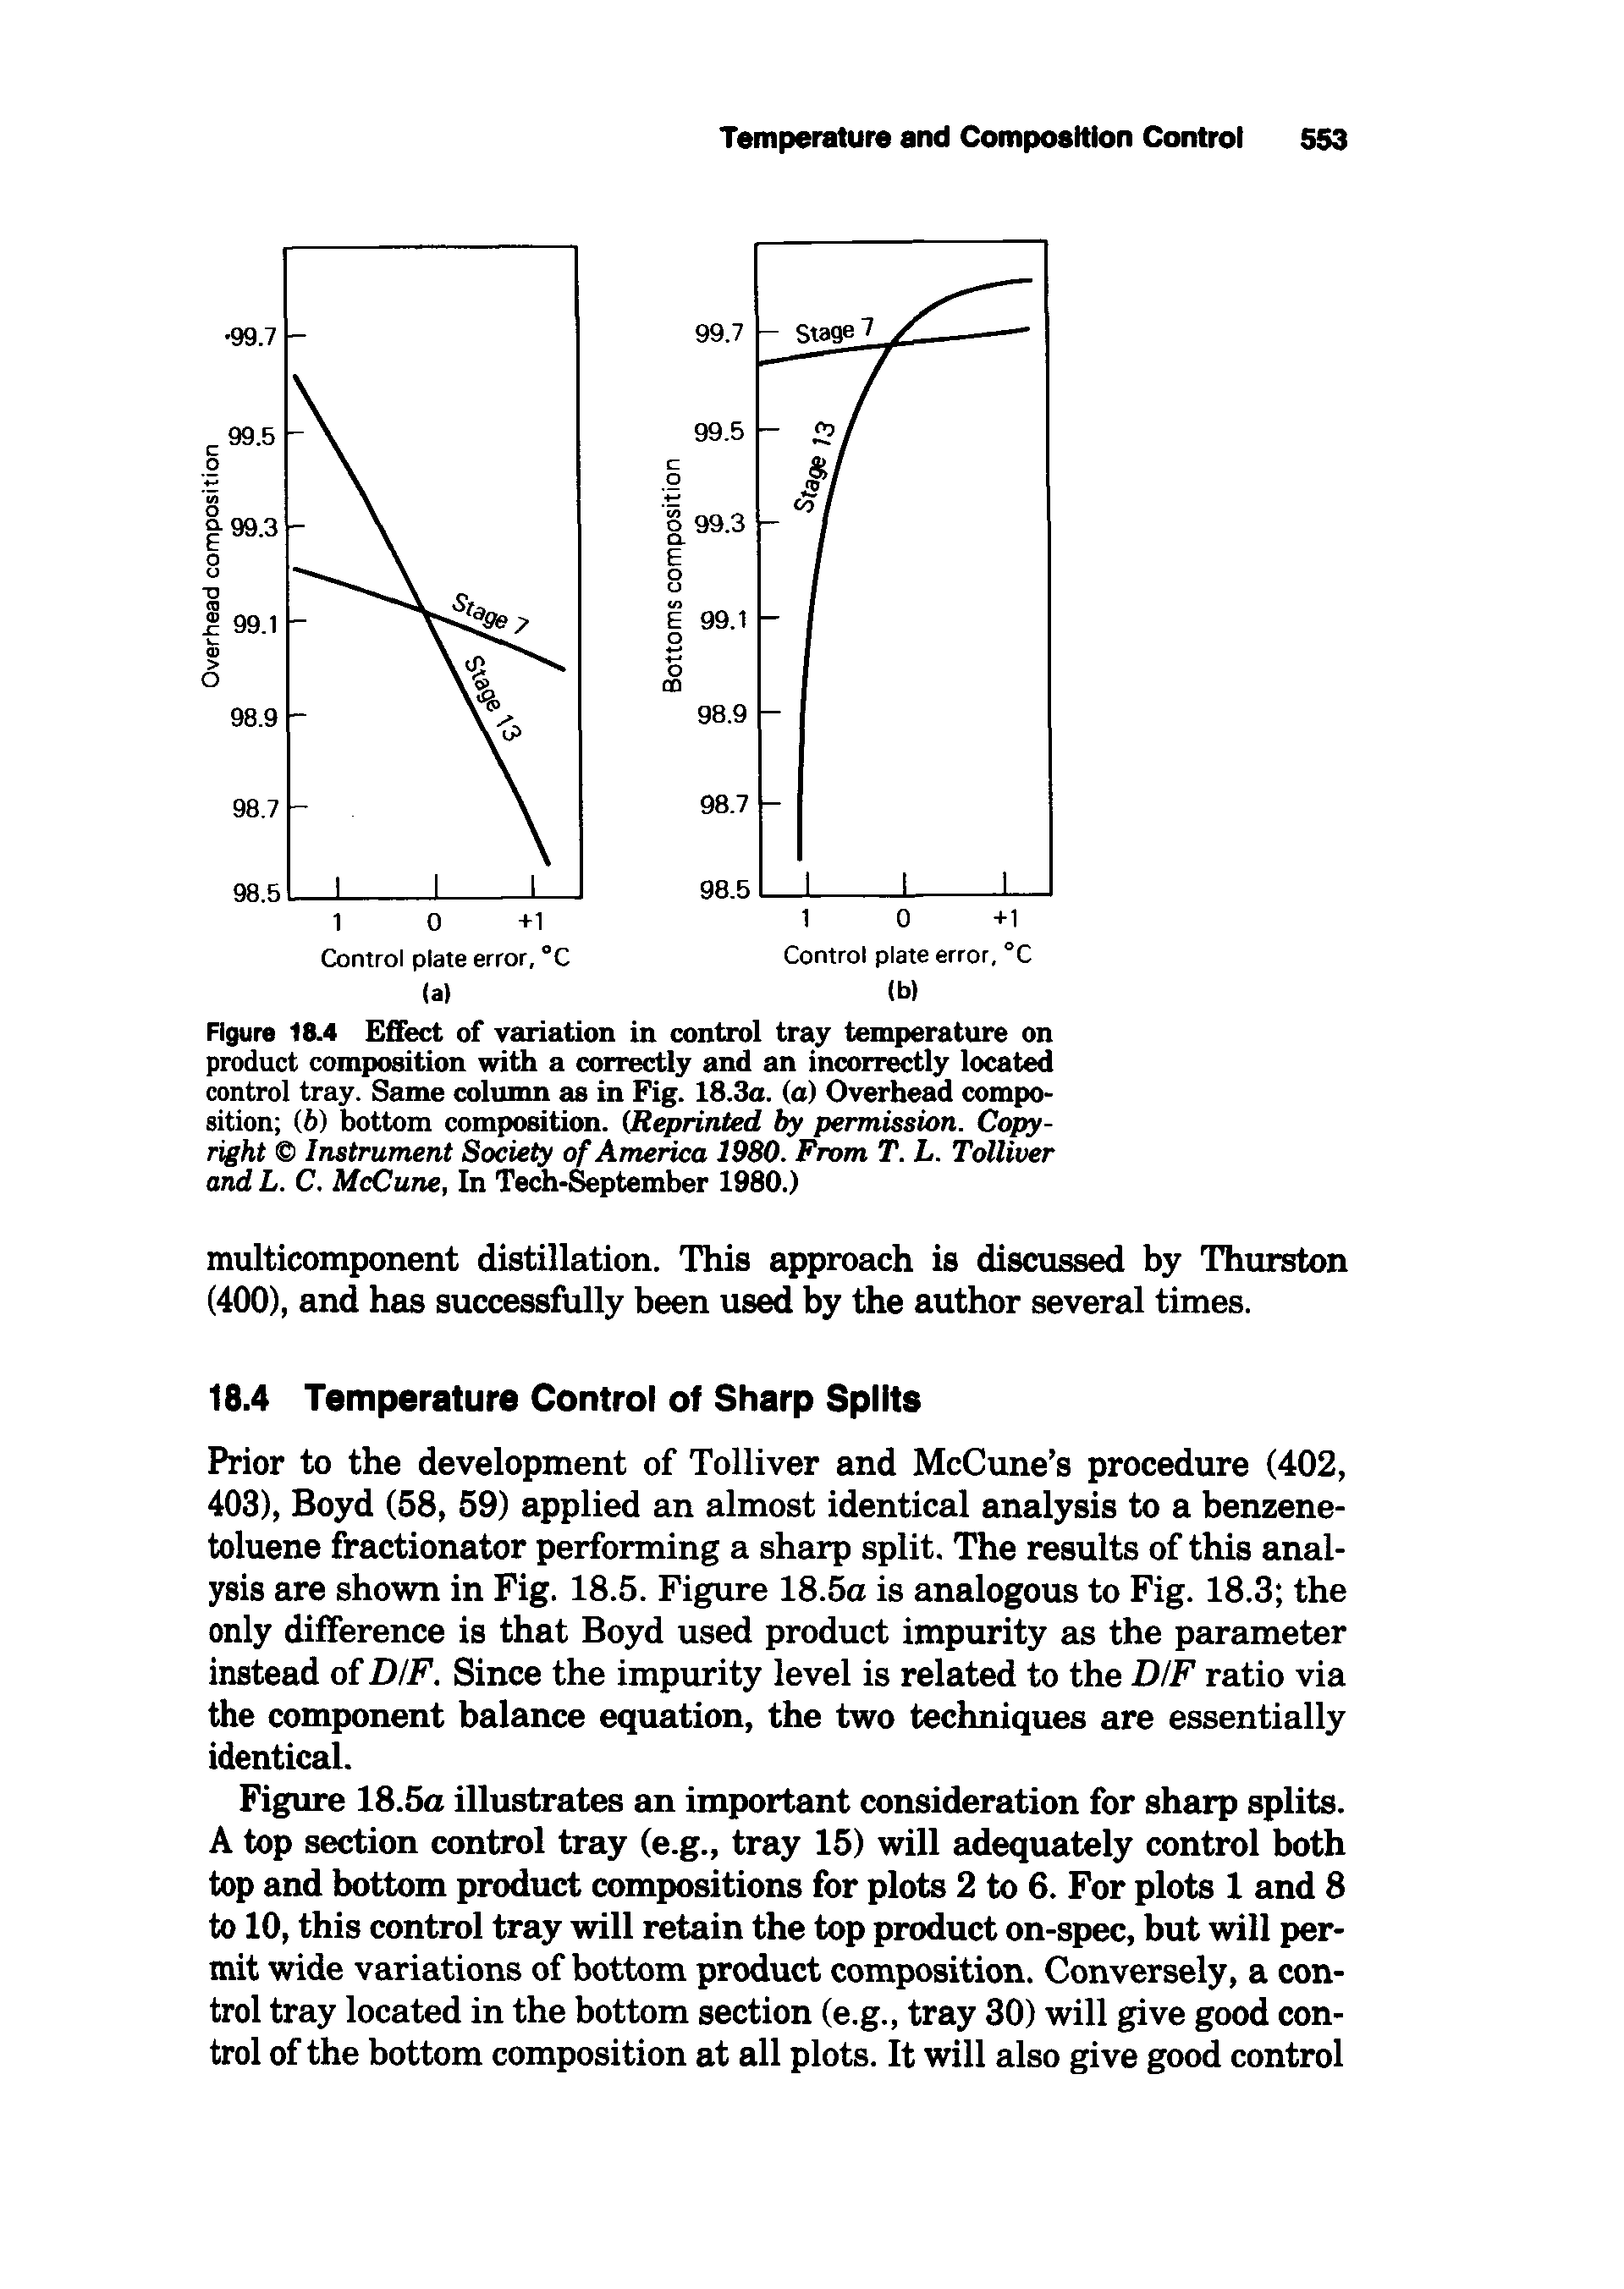 Figure 18.4 Effect of variation in control tray temperature on product composition with a correctly and an incorrectly located control tray. Same column as in Fig. 18.3a. (a) Overhead composition (6) bottom composition. (Reprinted by permission. Copyright Instrument Society of America 1980. From T. L. Tolliver and L. C. McCune, In Tech- ptember 1980.)...